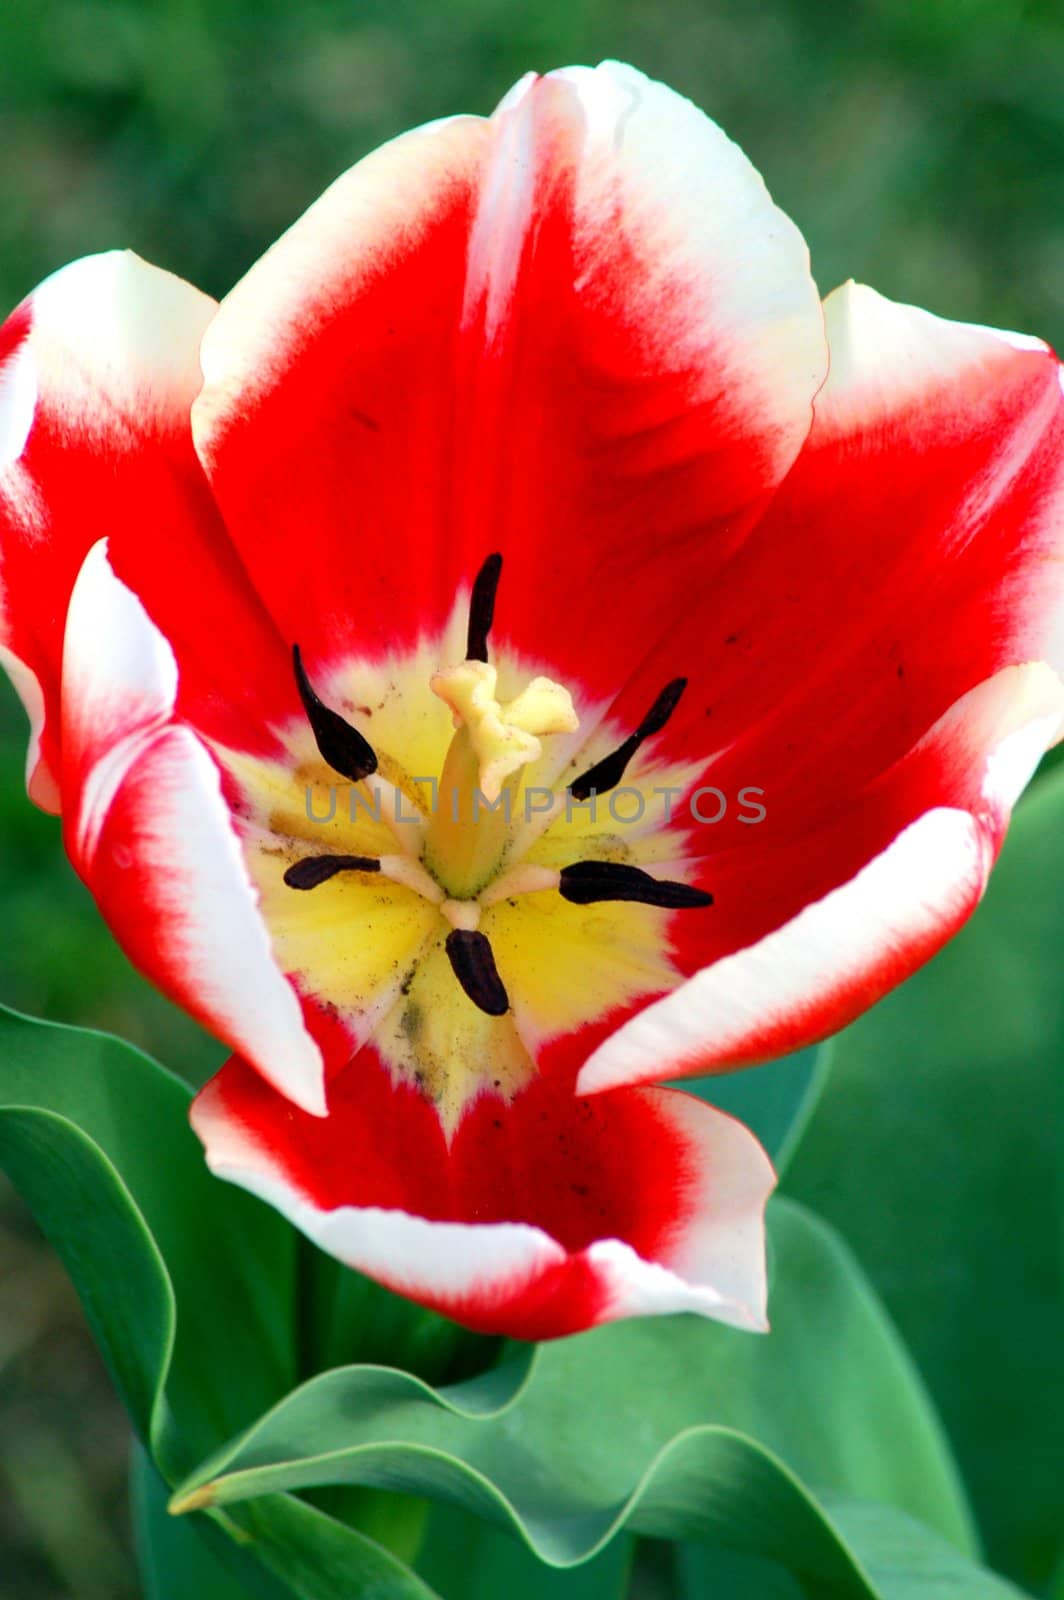 red white tulip flower by nikonite